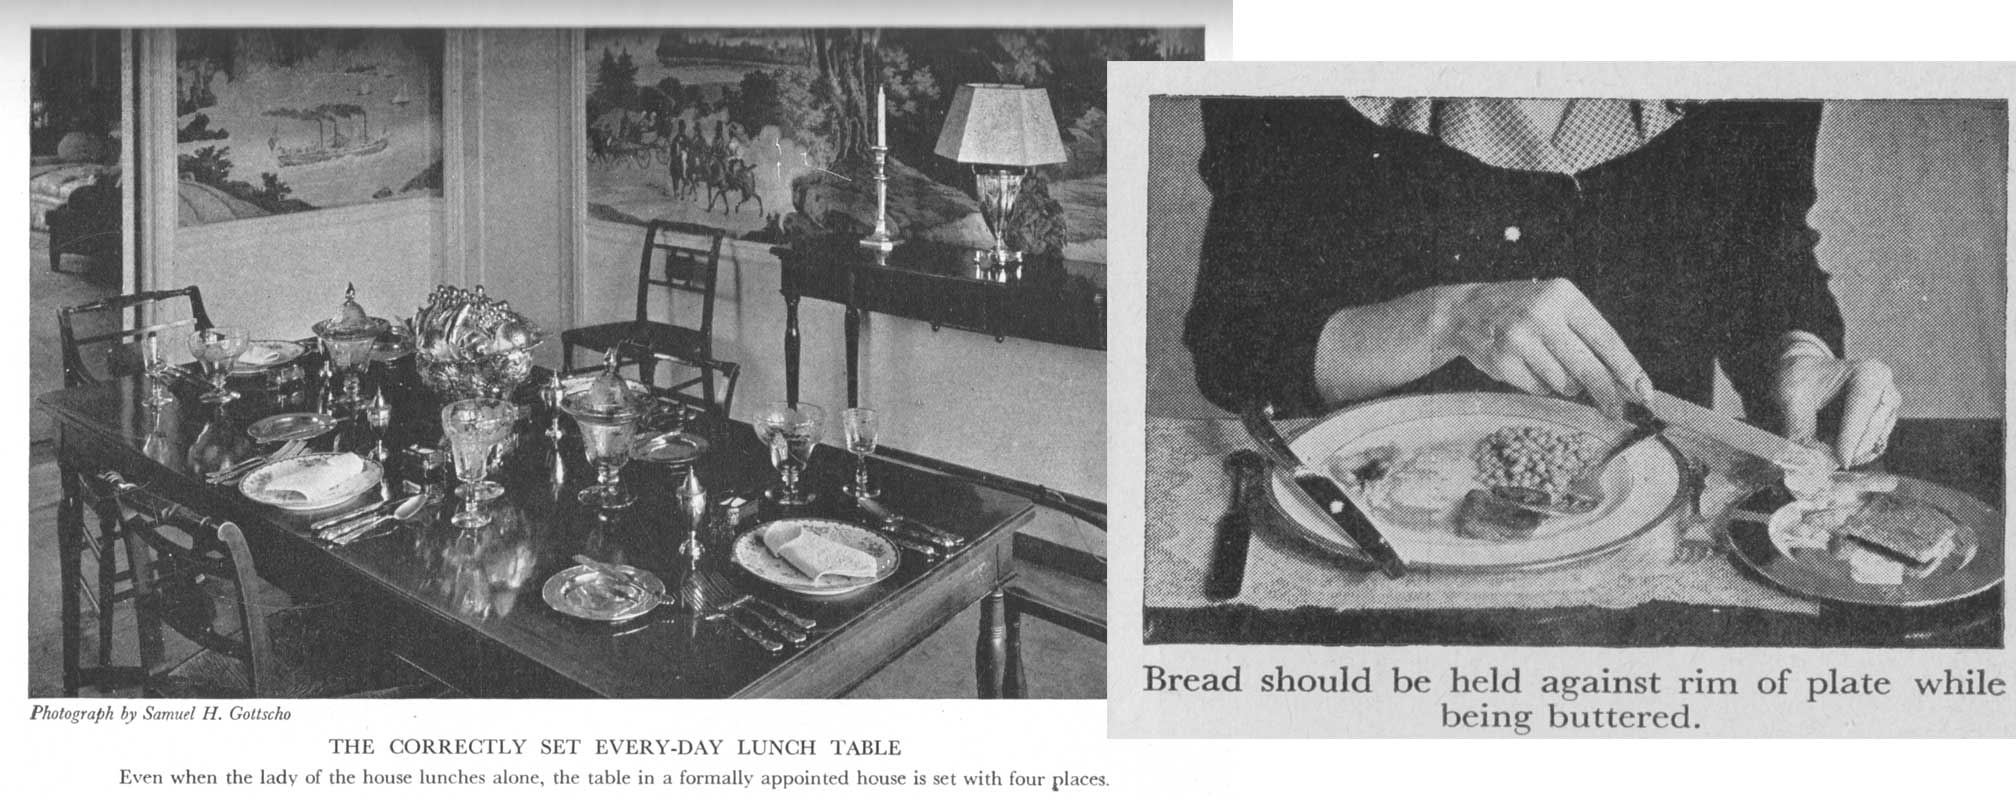 2 illustrations from the 1945 edition of Emily Post's Etiquette showing correct table setting and eating